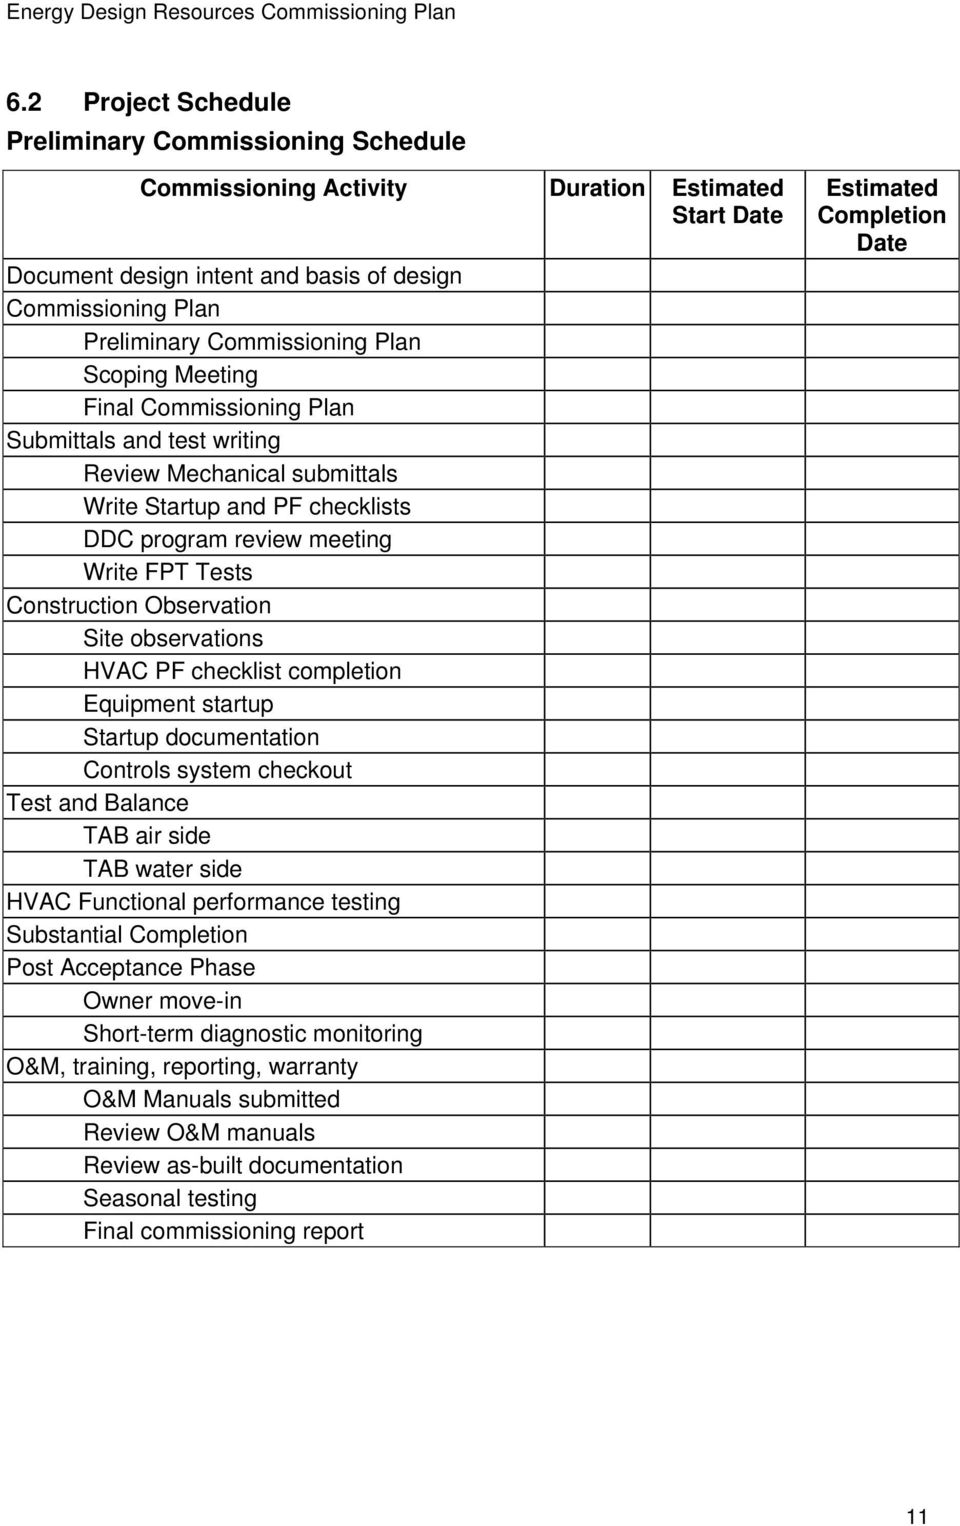 Energy Design Resources Commissioning Plan Outline Template - PDF  Within Equipment Commissioning Checklist Template Regarding Equipment Commissioning Checklist Template